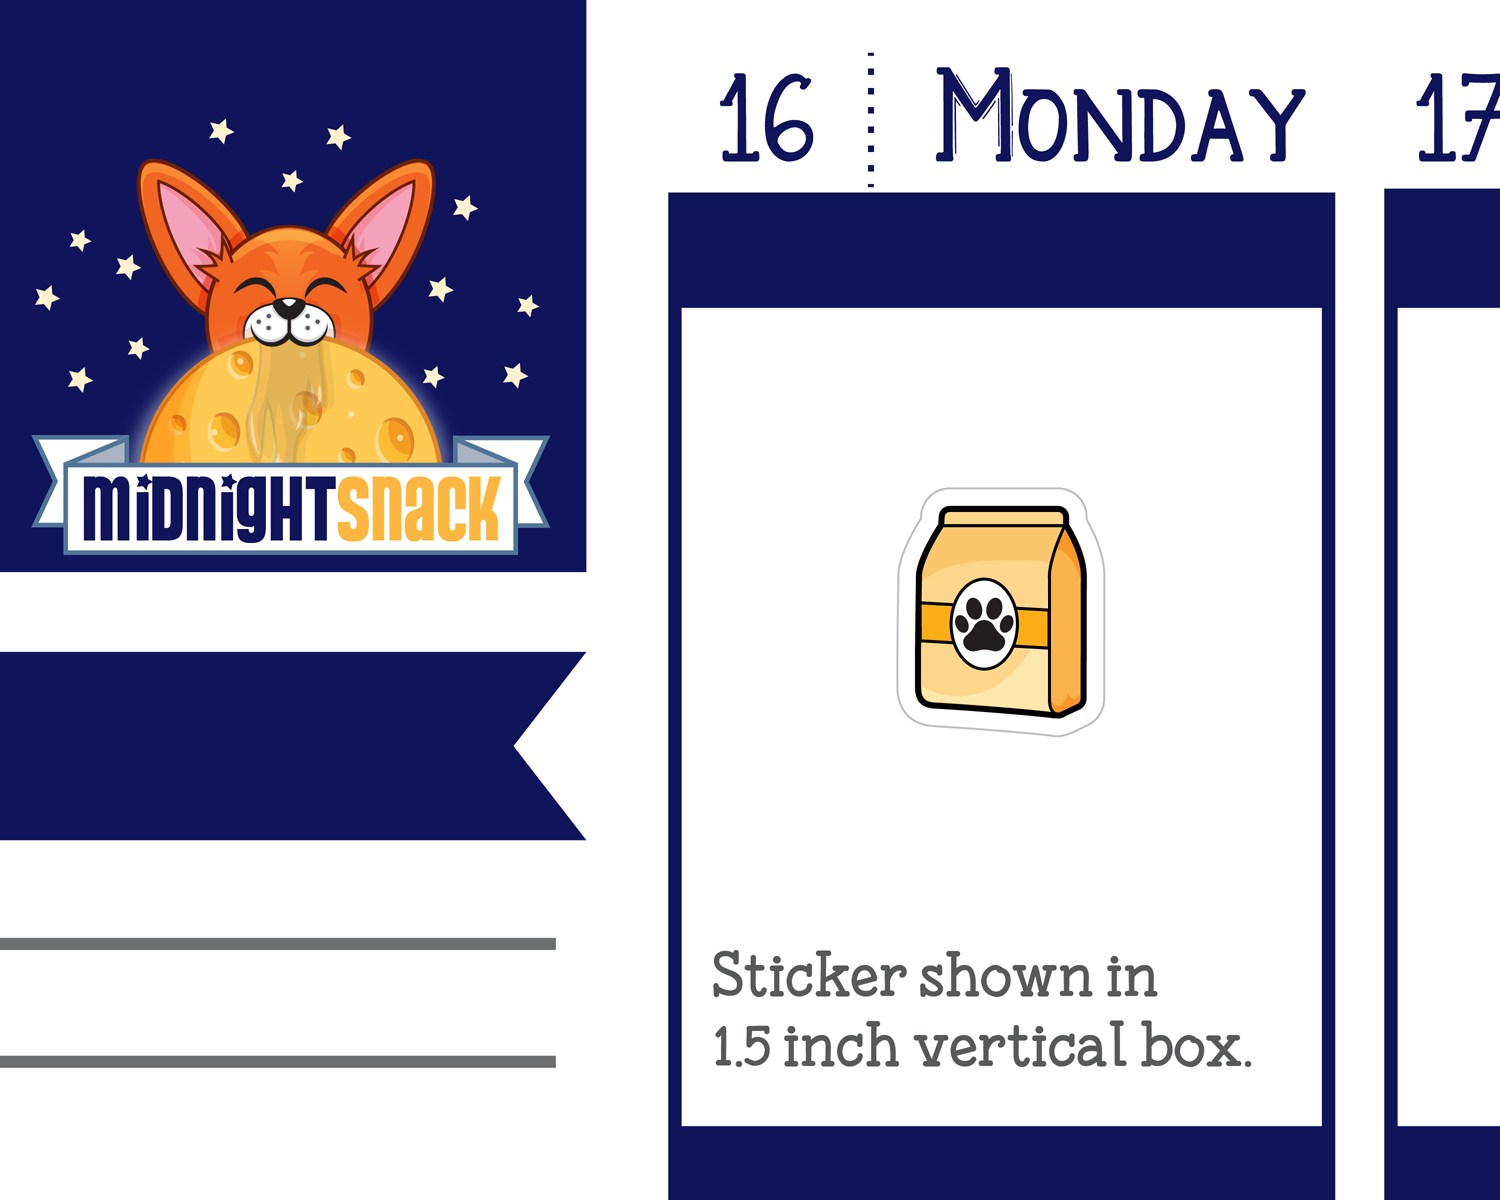 Bag of Pet Food Icon: Pet Care Planner Stickers